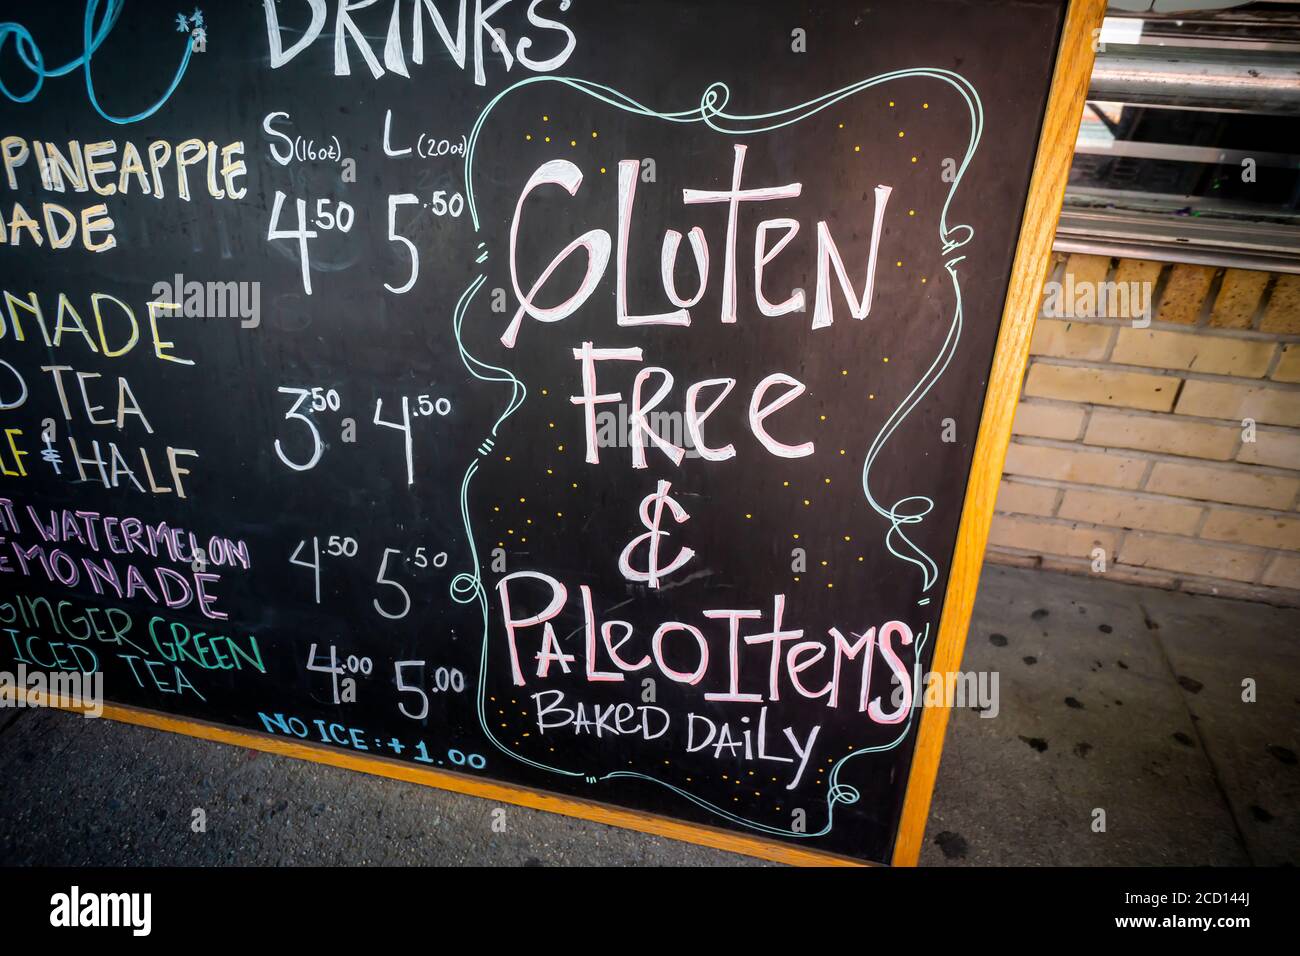 A sign outside a bakery in New York on Thursday, August 20, 2020 promotes their gluten free and paleo menu items. The protein gluten is found in wheat and is a flavoring and thickening food additive. People with celiac disease, dermatitis herpetiformis  and wheat allergies eat a gluten-free diet to prevent their disease or allergy. (© Richard B. Levine) Stock Photo